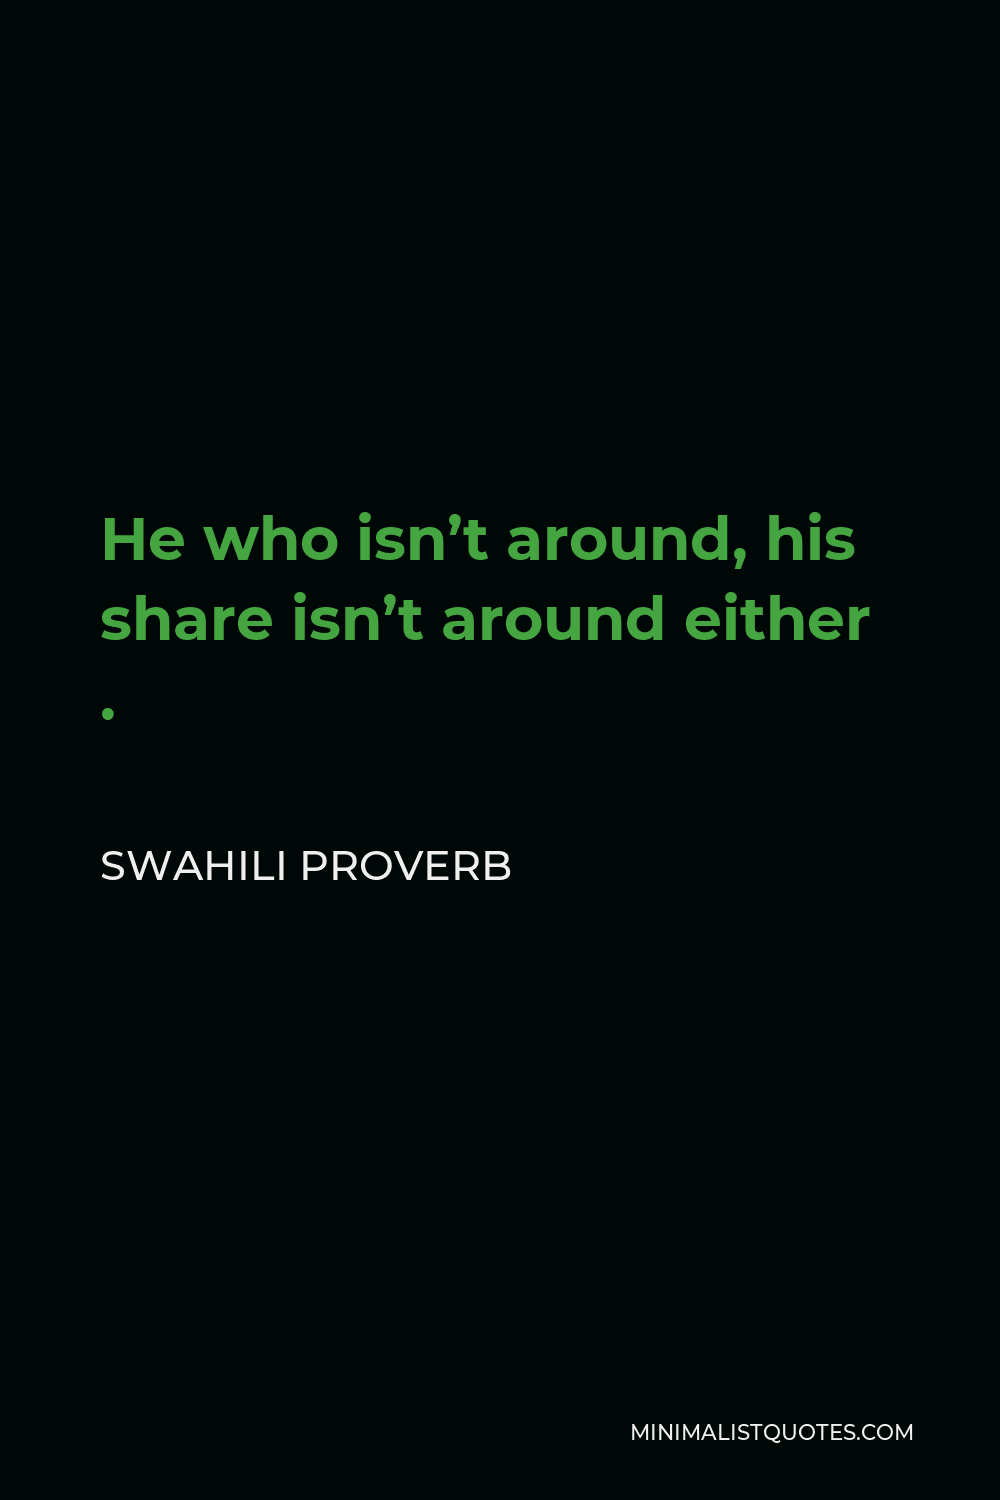 Swahili Proverb Quote - He who isn’t around, his share isn’t around either .